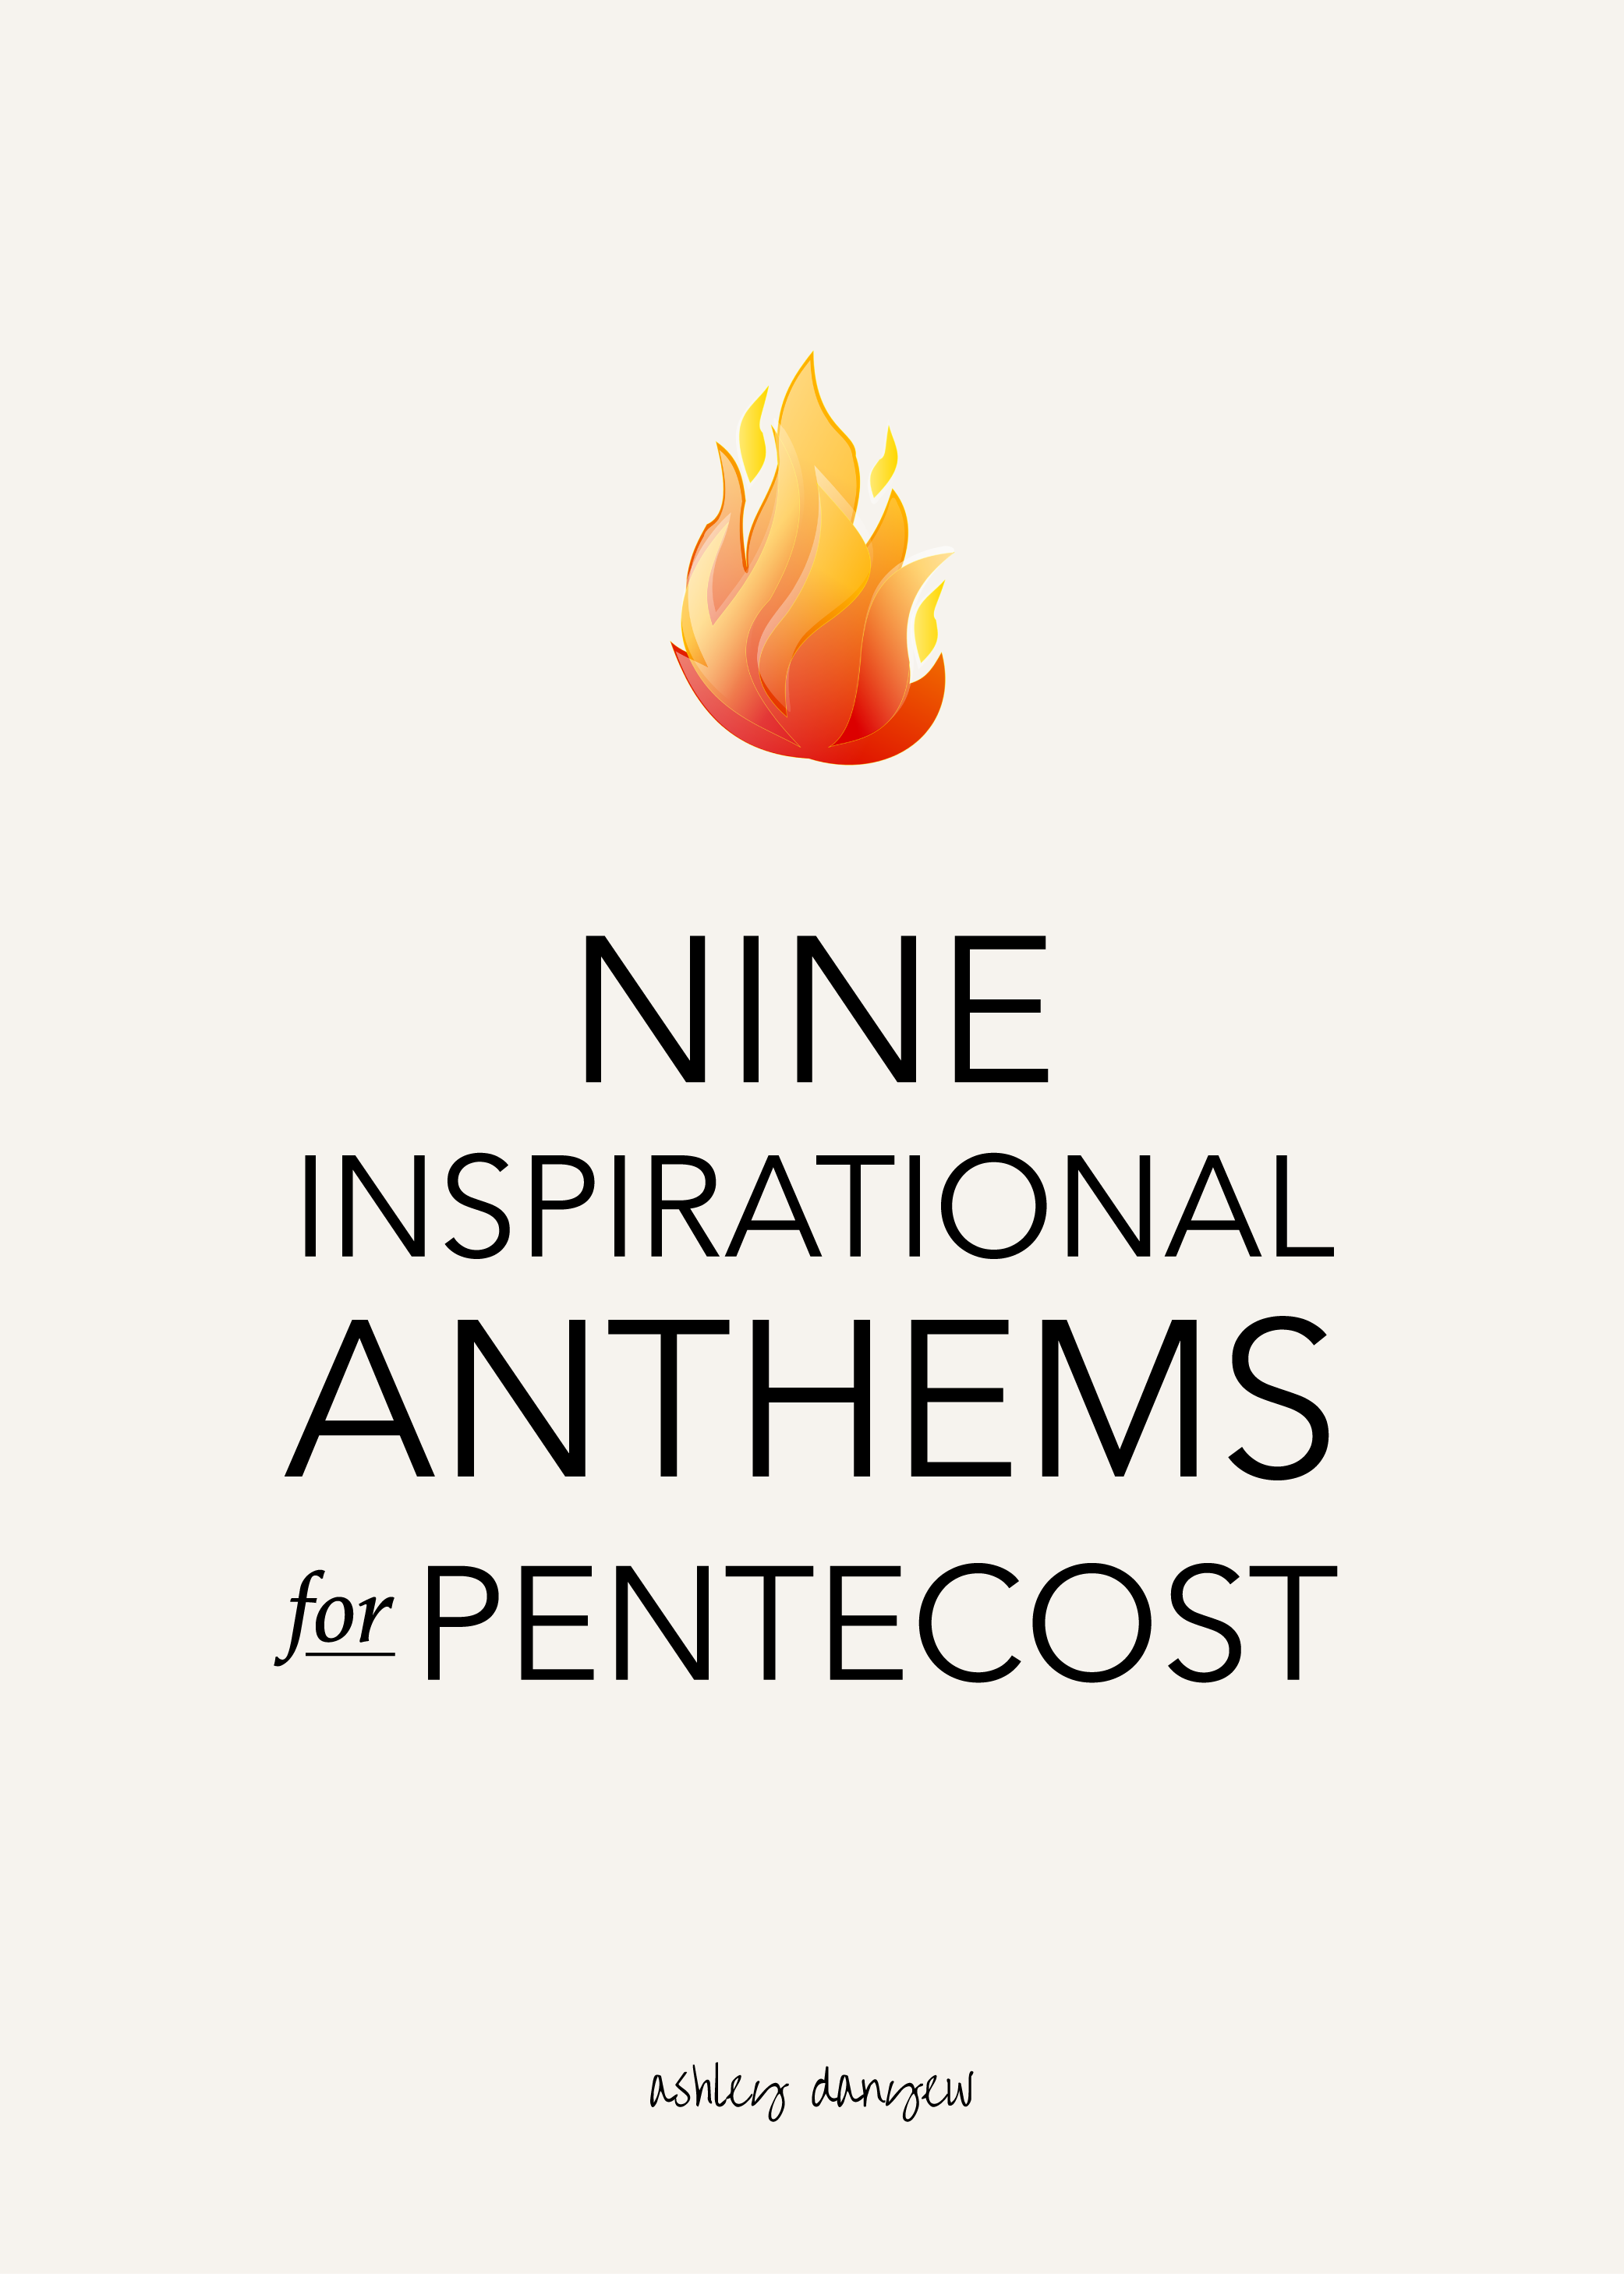 Nine Inspirational Anthems for Pentecost-01.png